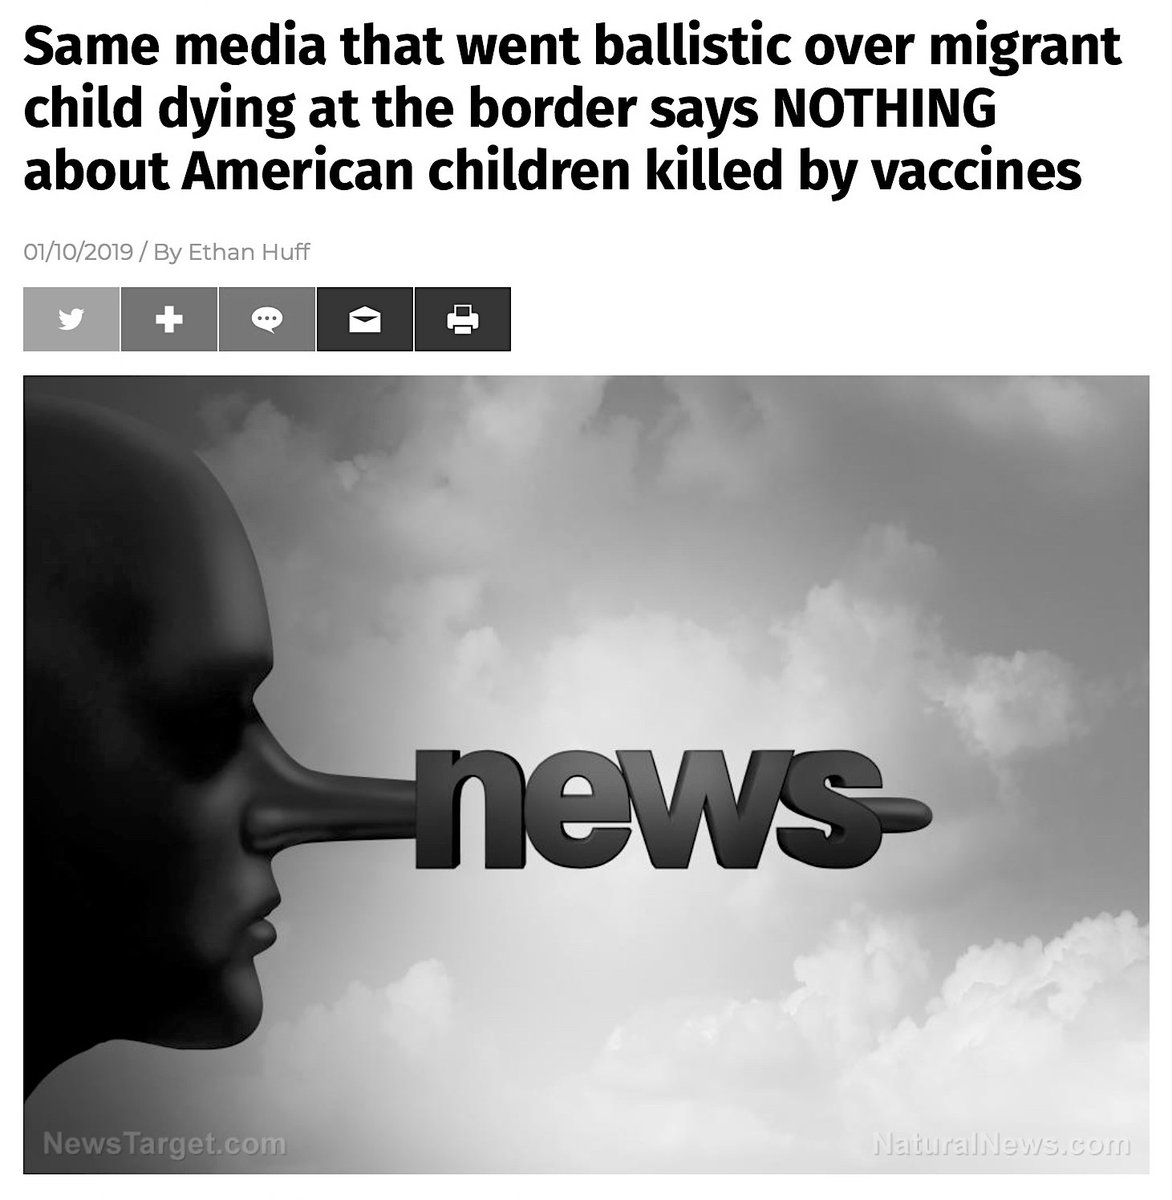 Data In The FDA's Vaccine Adverse Event Reporting System (VAERS) Suggest That Thousands Or Even Millions Of American Children Have Died Or Suffered Serious, And Oftentimes Permanent, Health Consequences As A Result Of Getting Vaccinated. https://www.vaccines.news/2019-01-10-media-migrant-child-says-nothing-about-american-children.html #QAnon  @potus